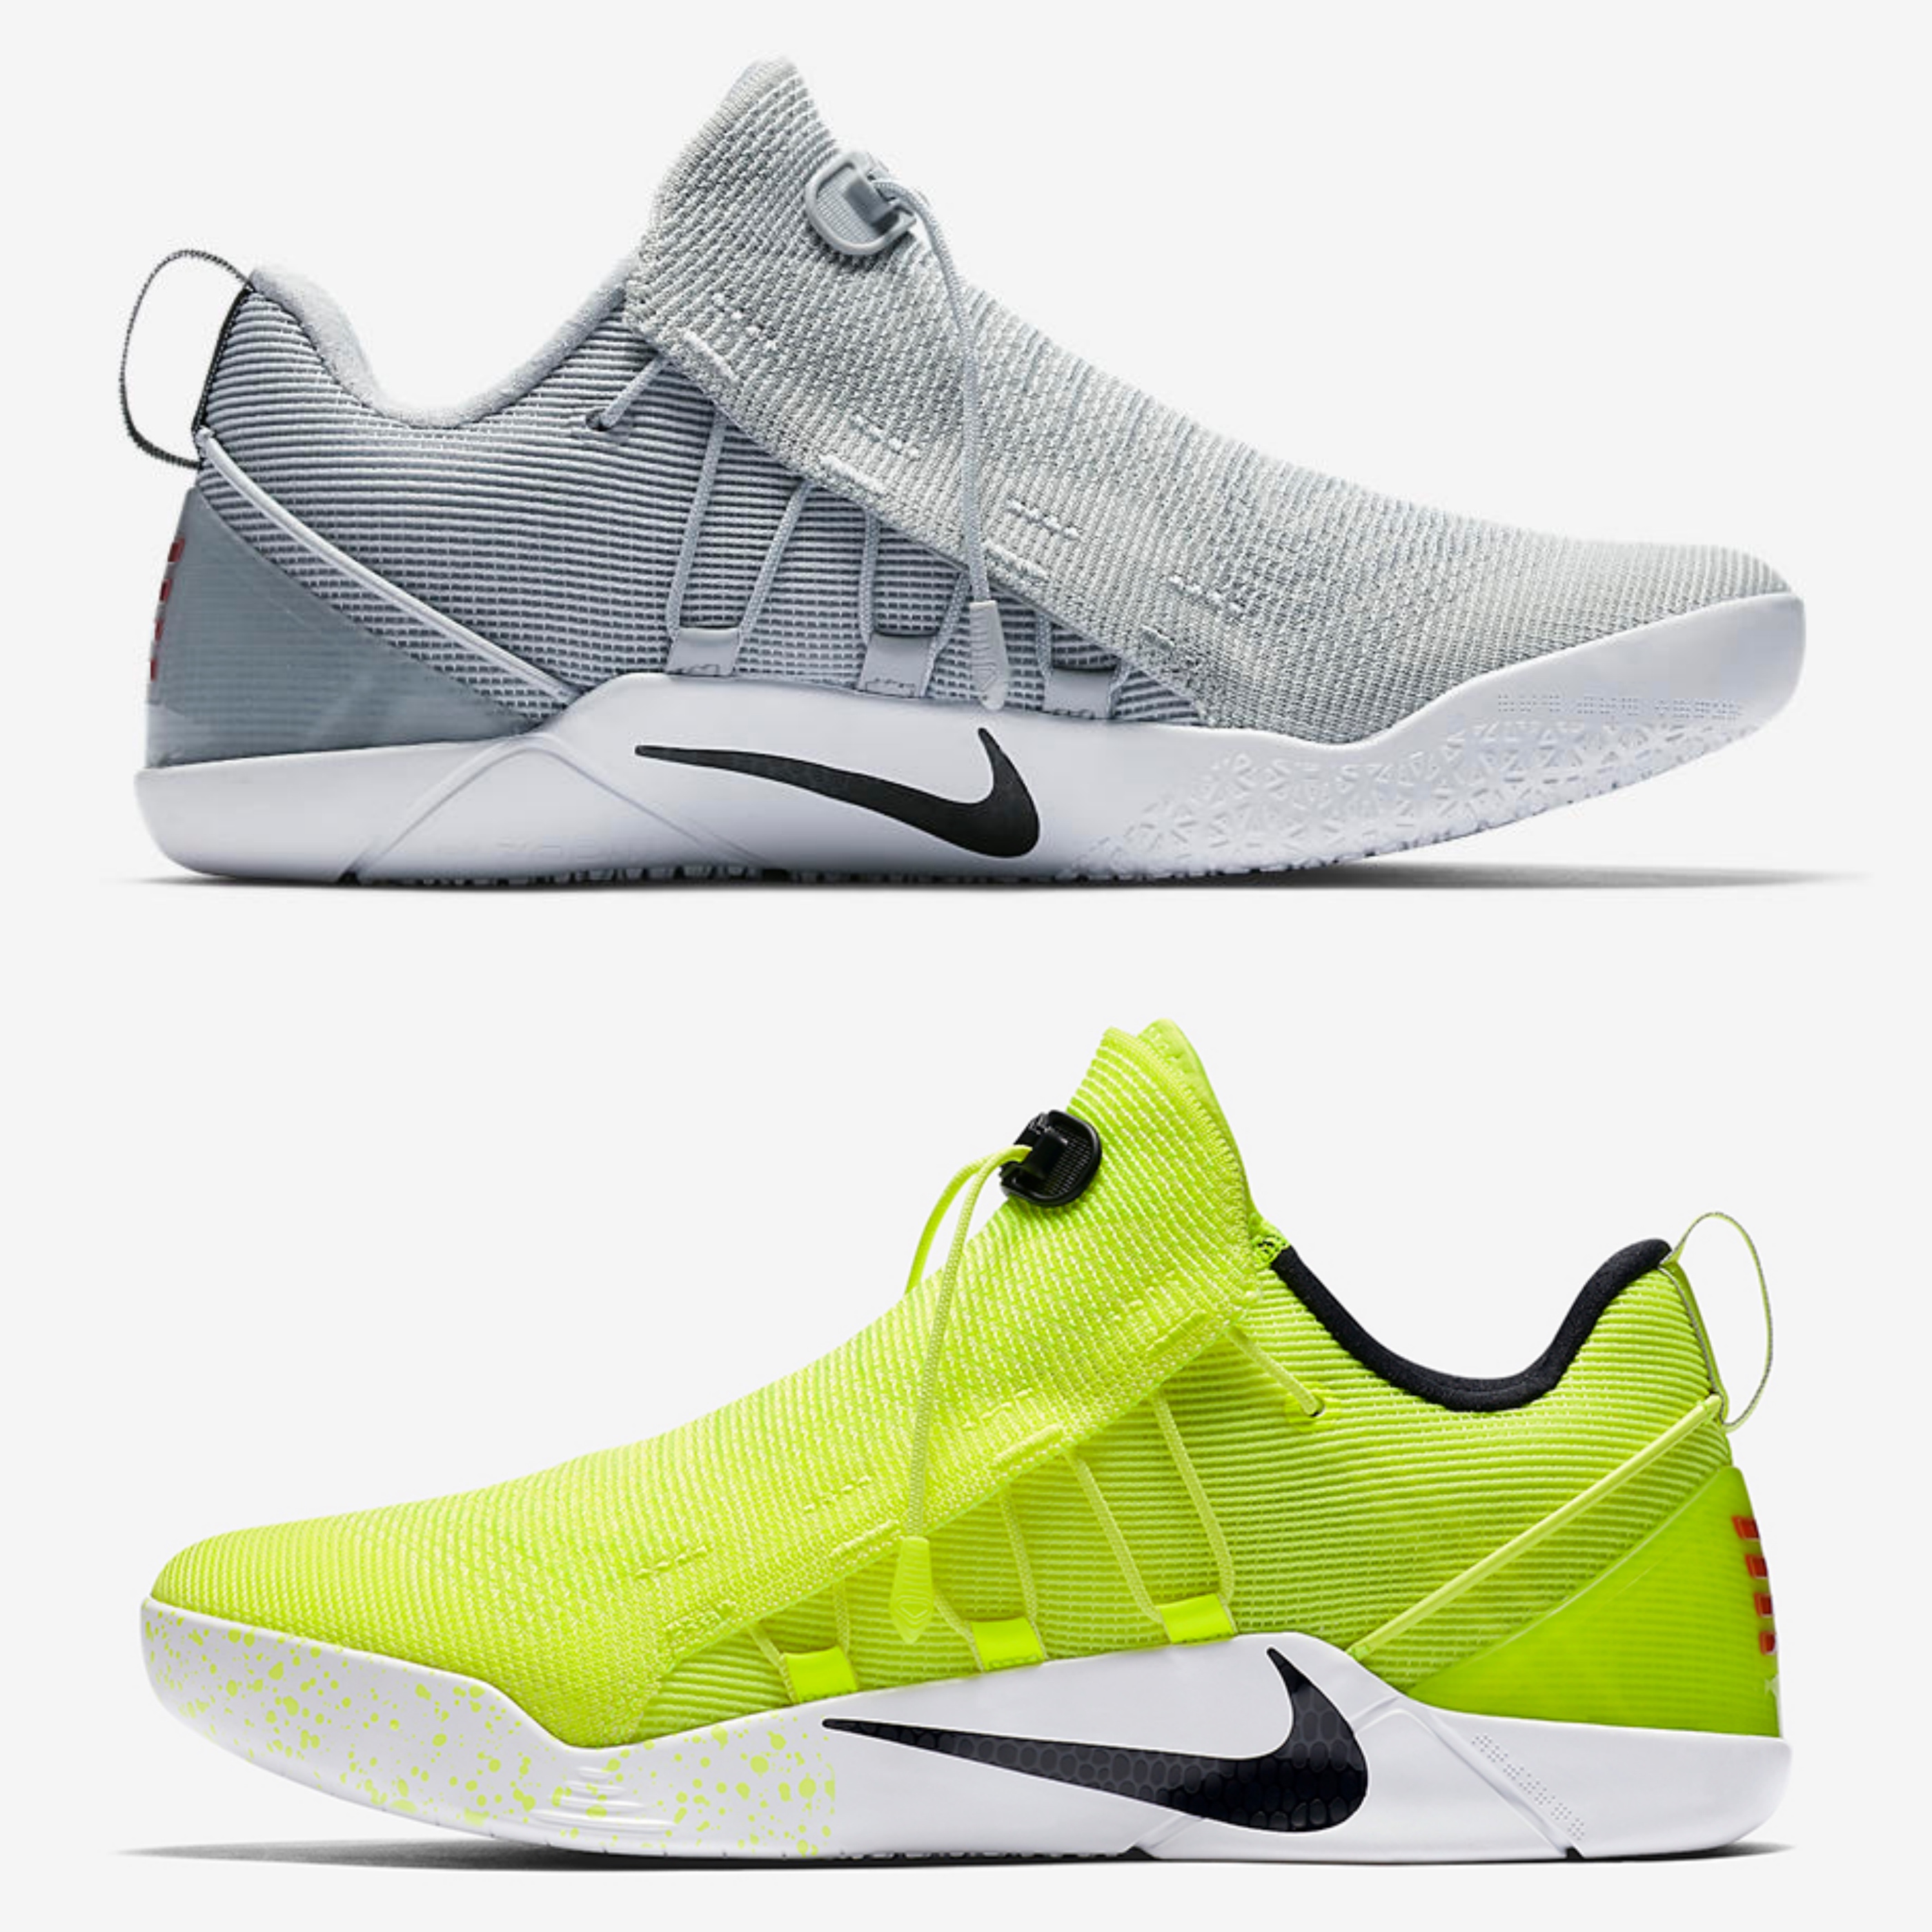 The Nike Kobe A.D. NXT is Available Now 